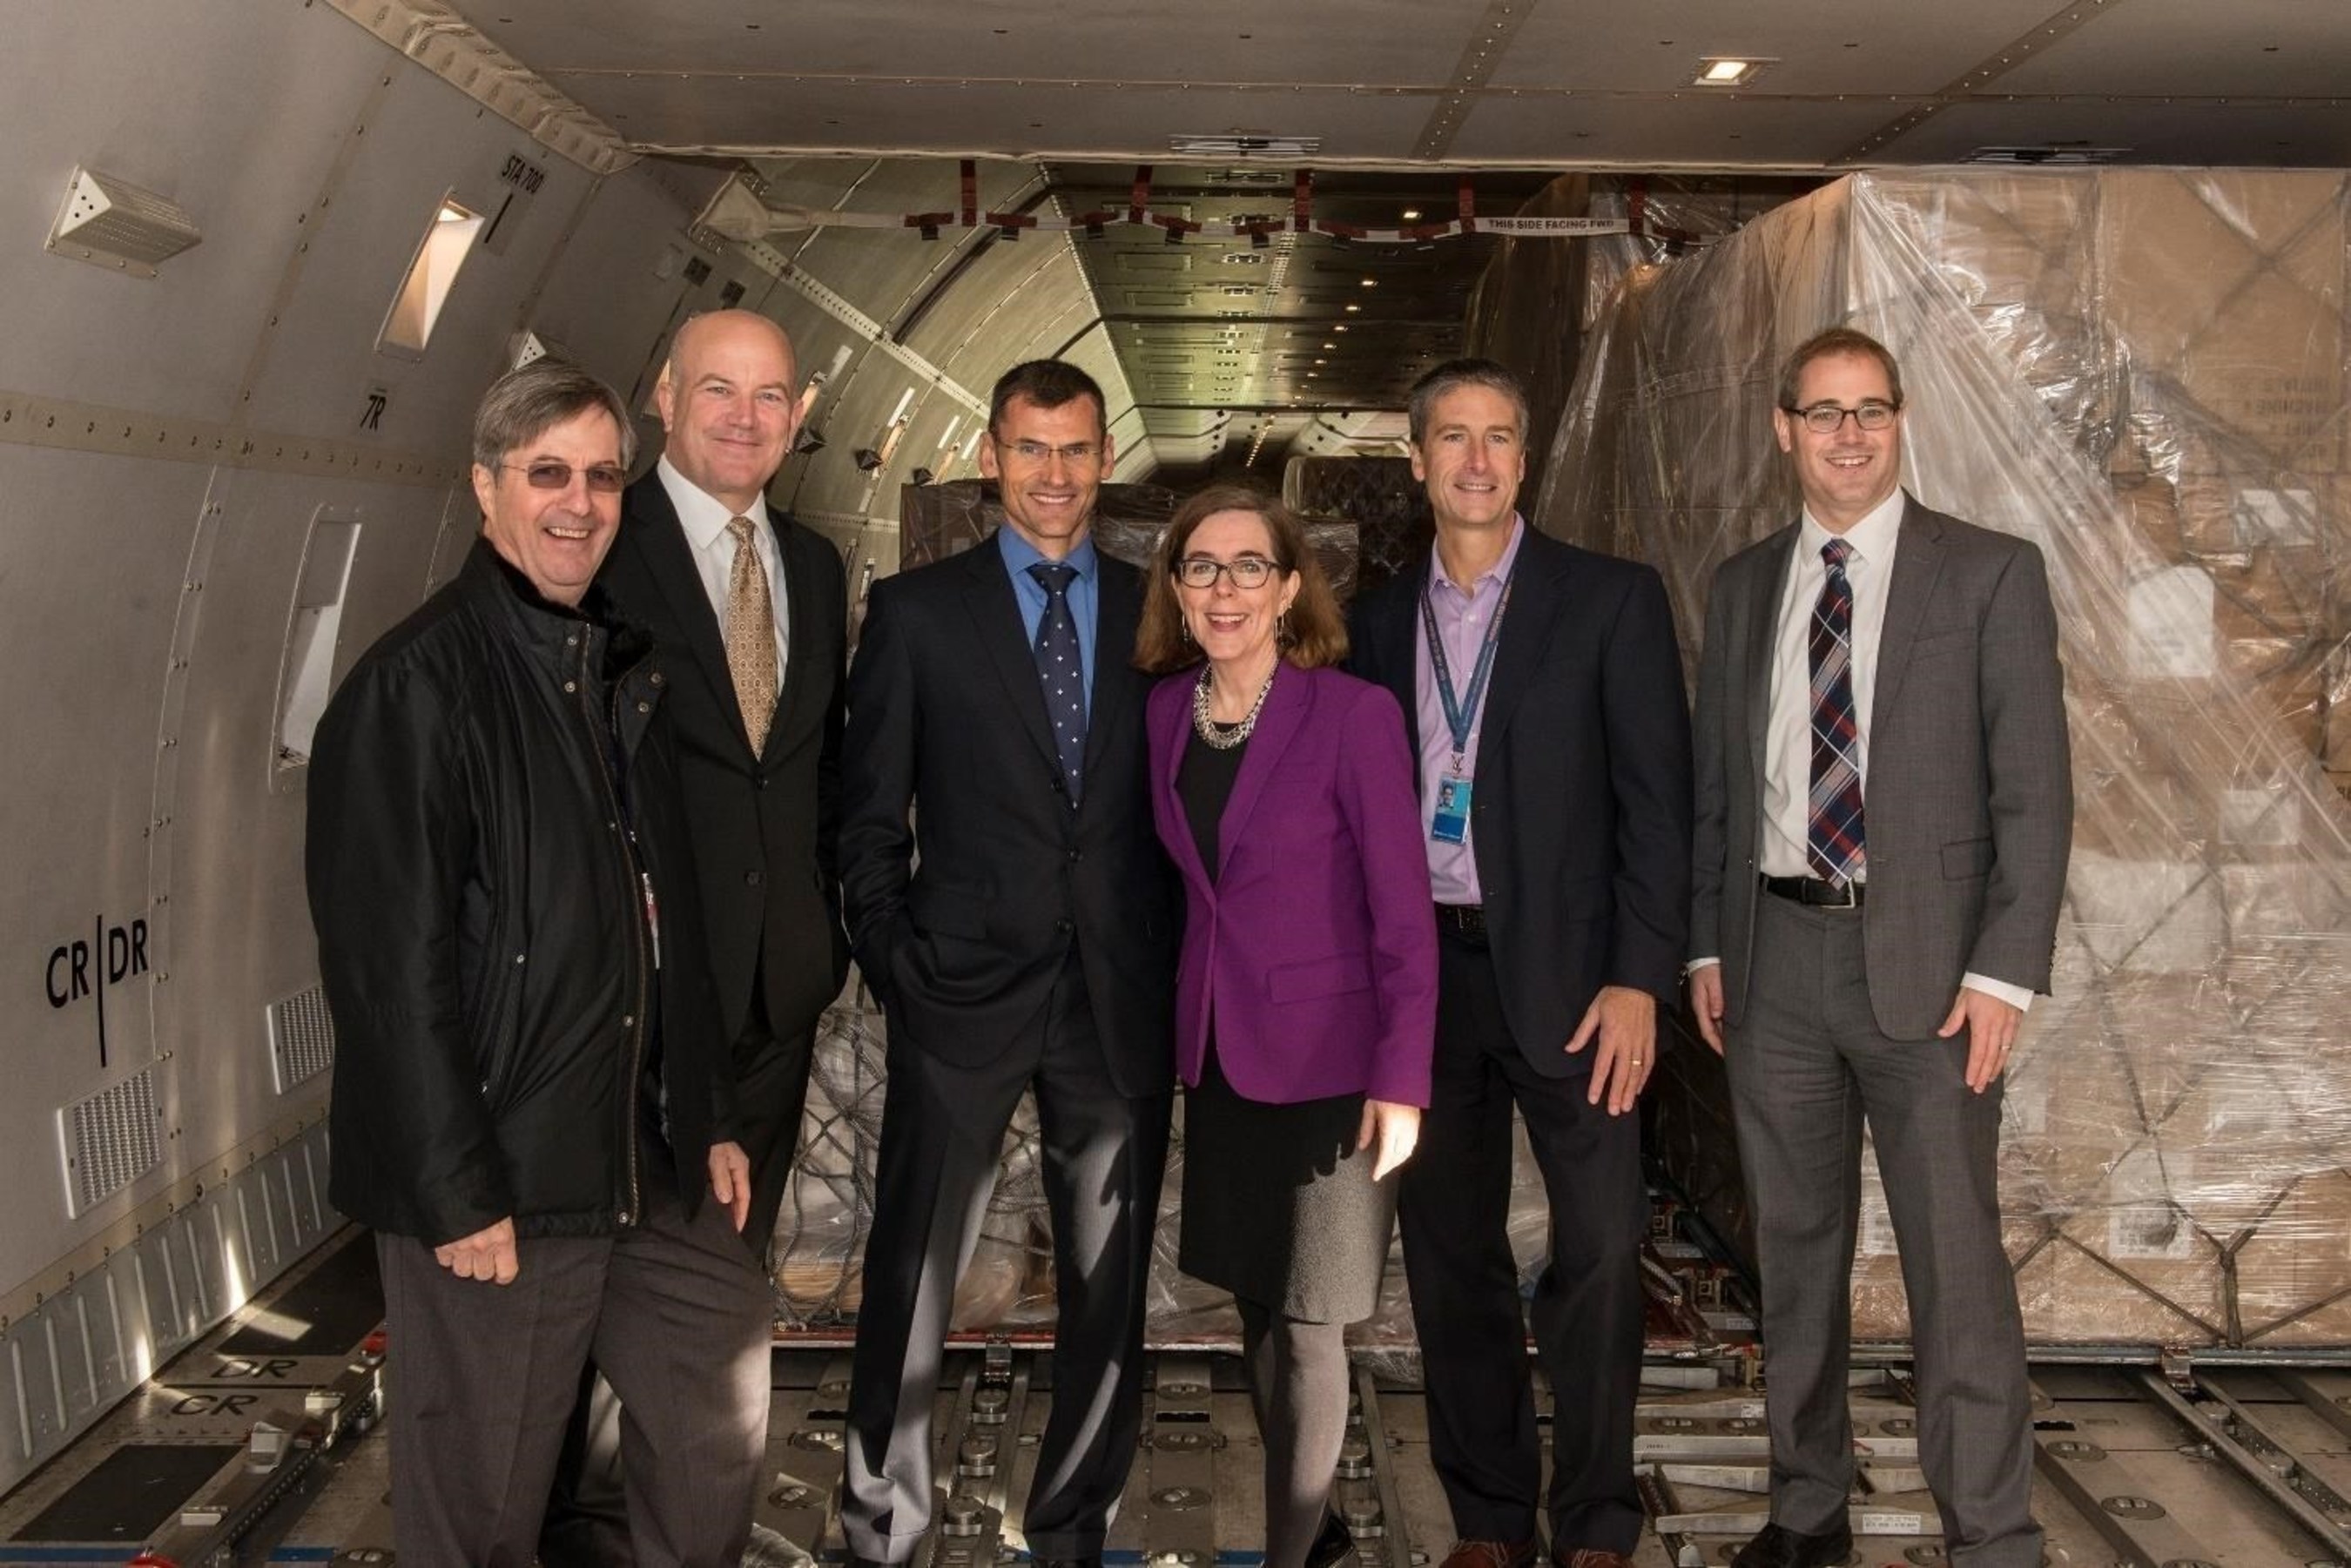 L-R: Bill Wyatt, Port of Portland Executive Director; Curtis Robinhold, Port of Portland Deputy Executive Director; Phillippe LaCamp, Cathay Pacific, Senior Vice President, Americas; Oregon Governor Kate Brown; Keith Leavitt, Port of Portland Chief Commercial Officer; and, Chris Harder, Business Oregon Director.